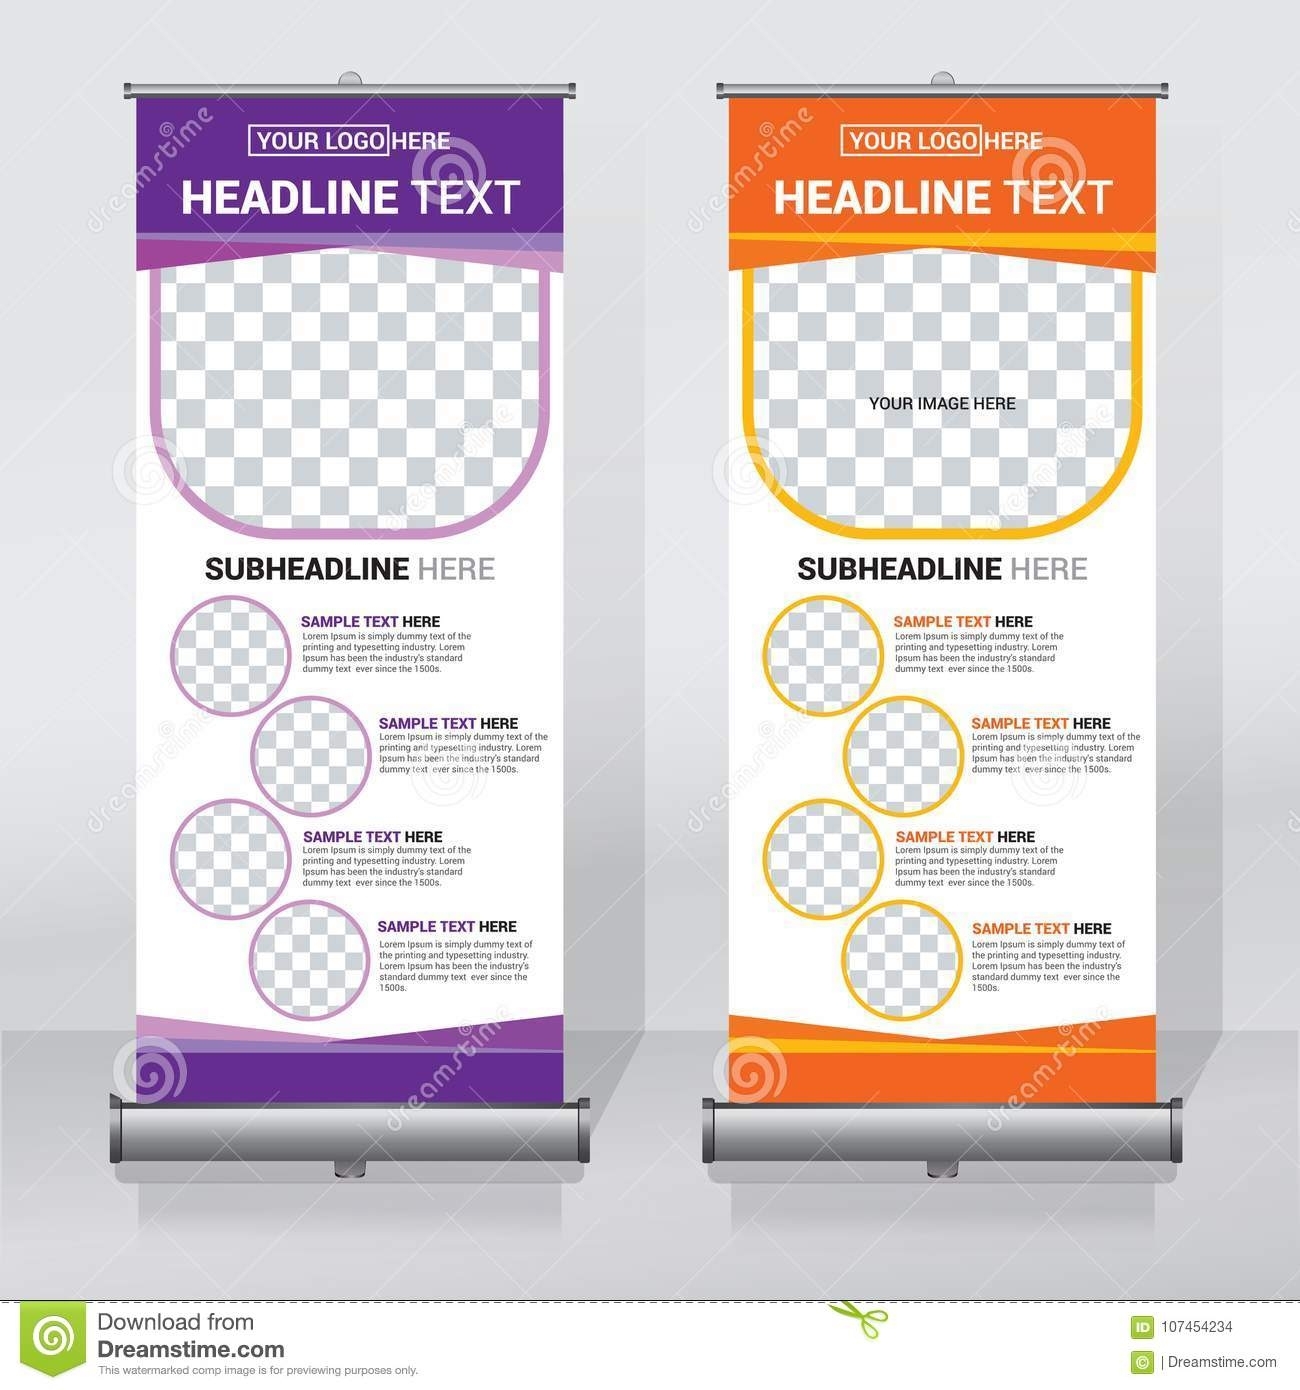 Retractable Banner Design Templates With Regard To Retractable Banner Design Templates